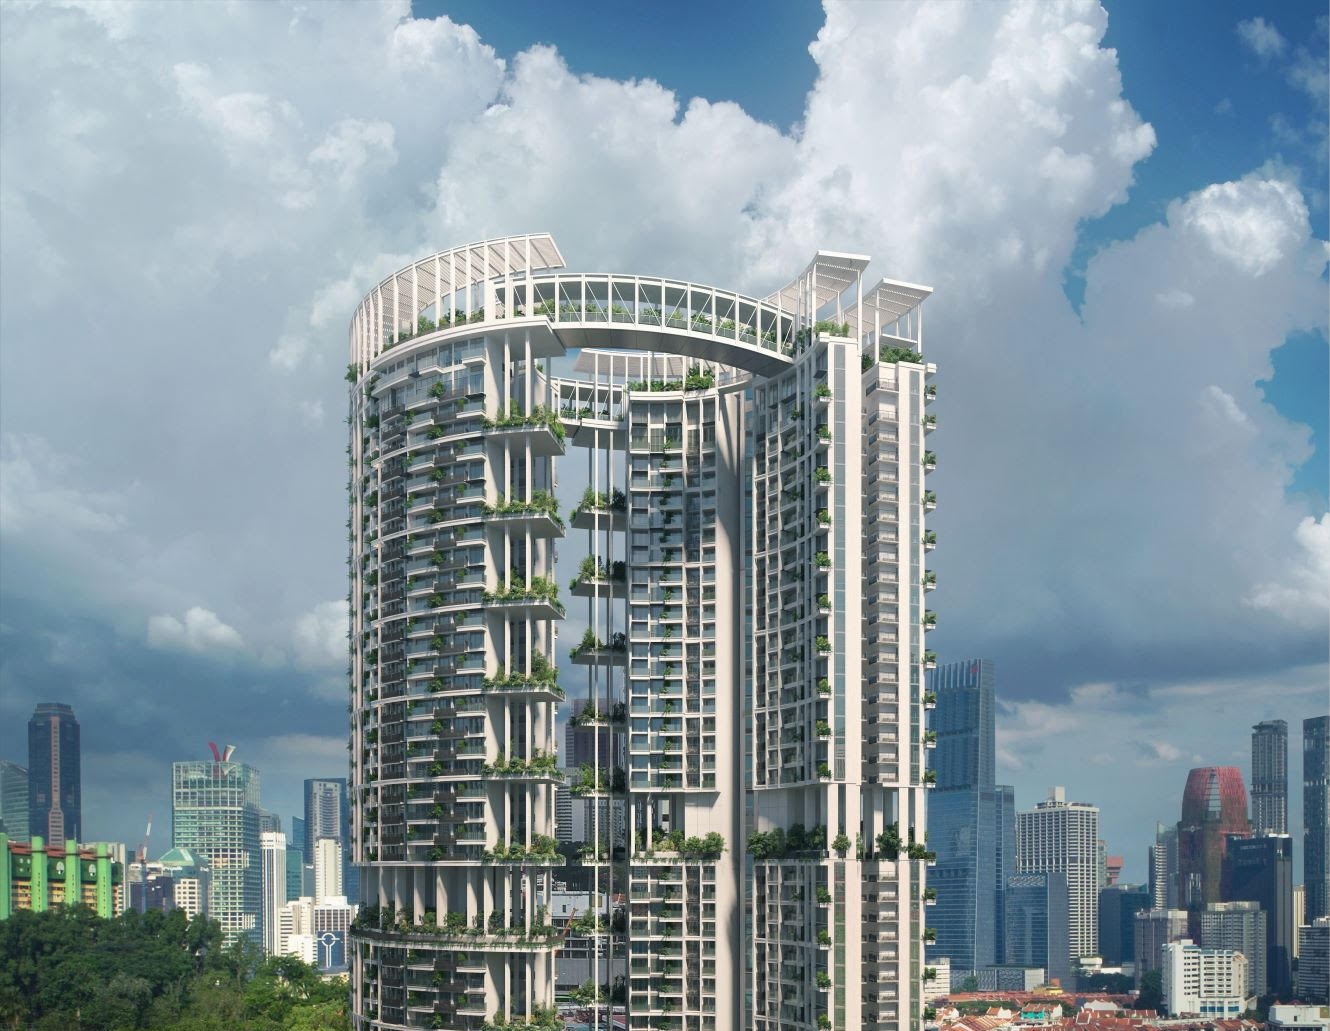 Perched atop the verdant Pearl’s Hill City Park, One Pearl Bank is set to be the tallest residential development in the Outram-Chinatown district in Central Singapore. Artist's impression of One Pearl Bank.